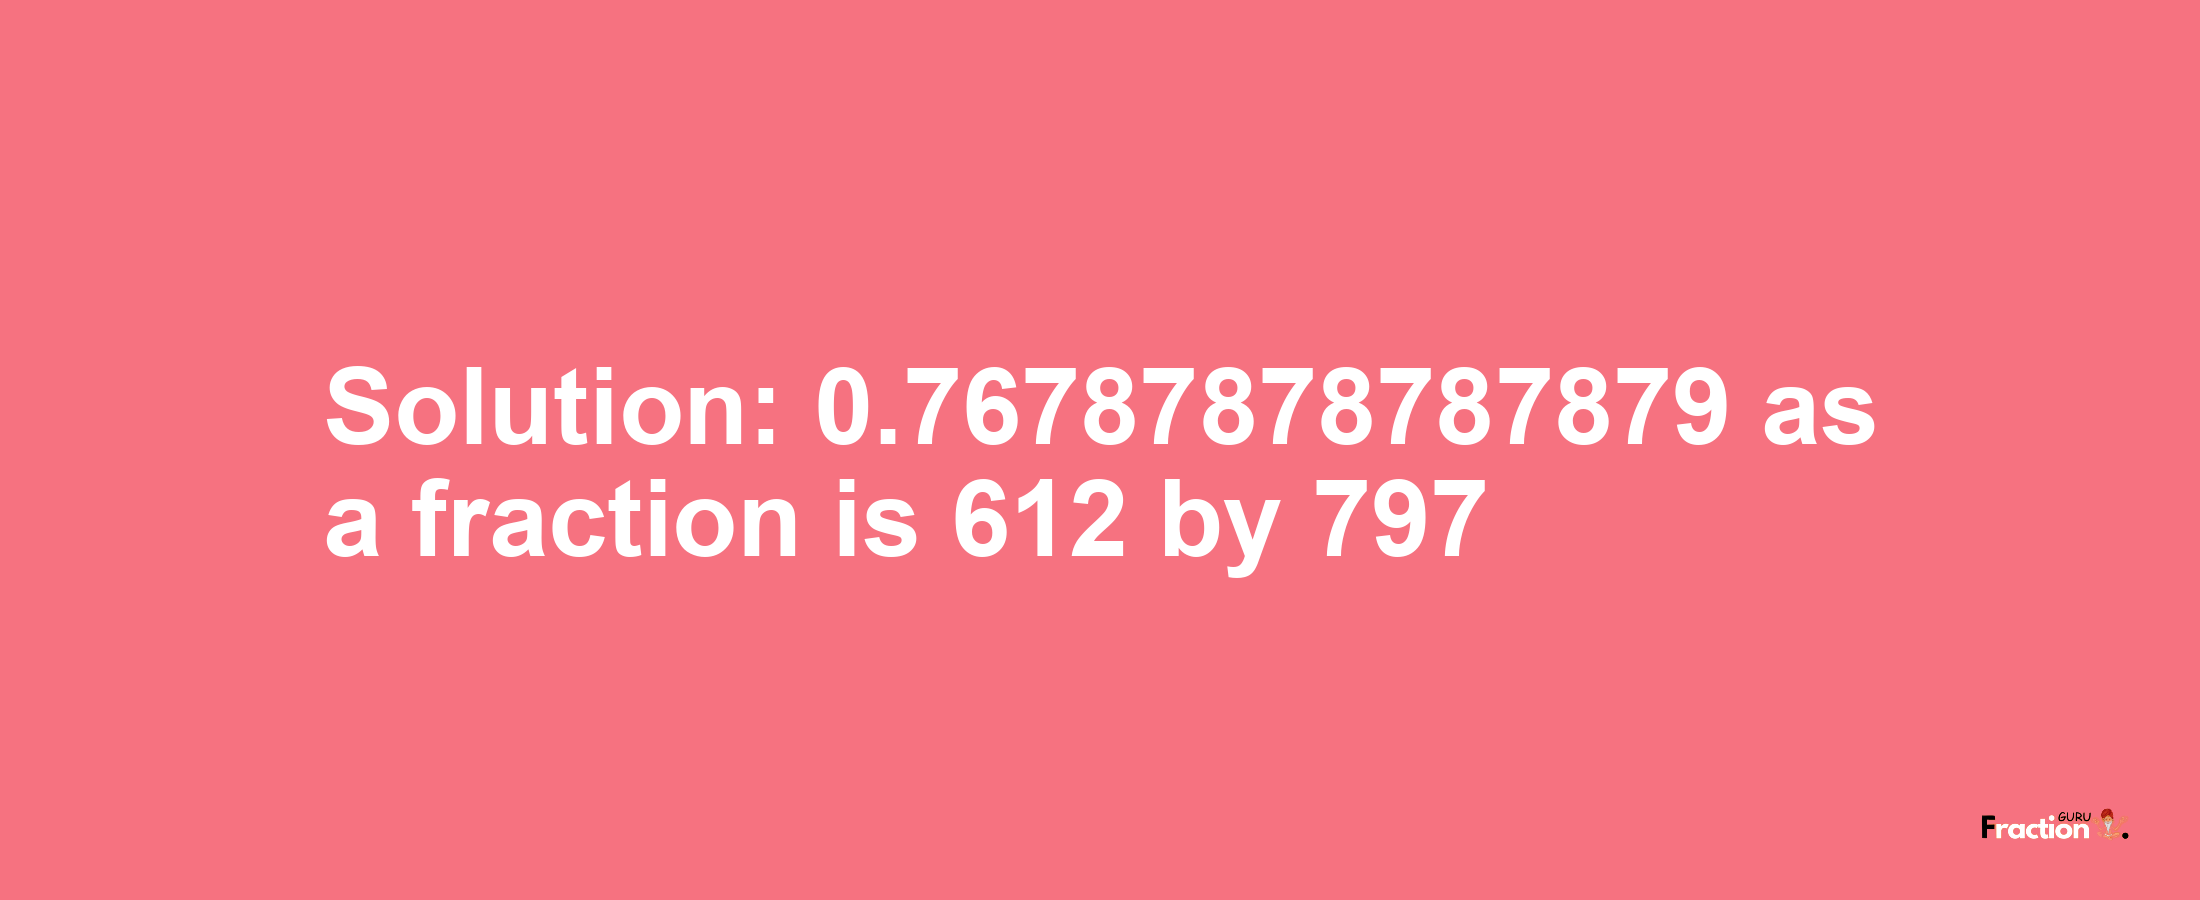 Solution:0.76787878787879 as a fraction is 612/797